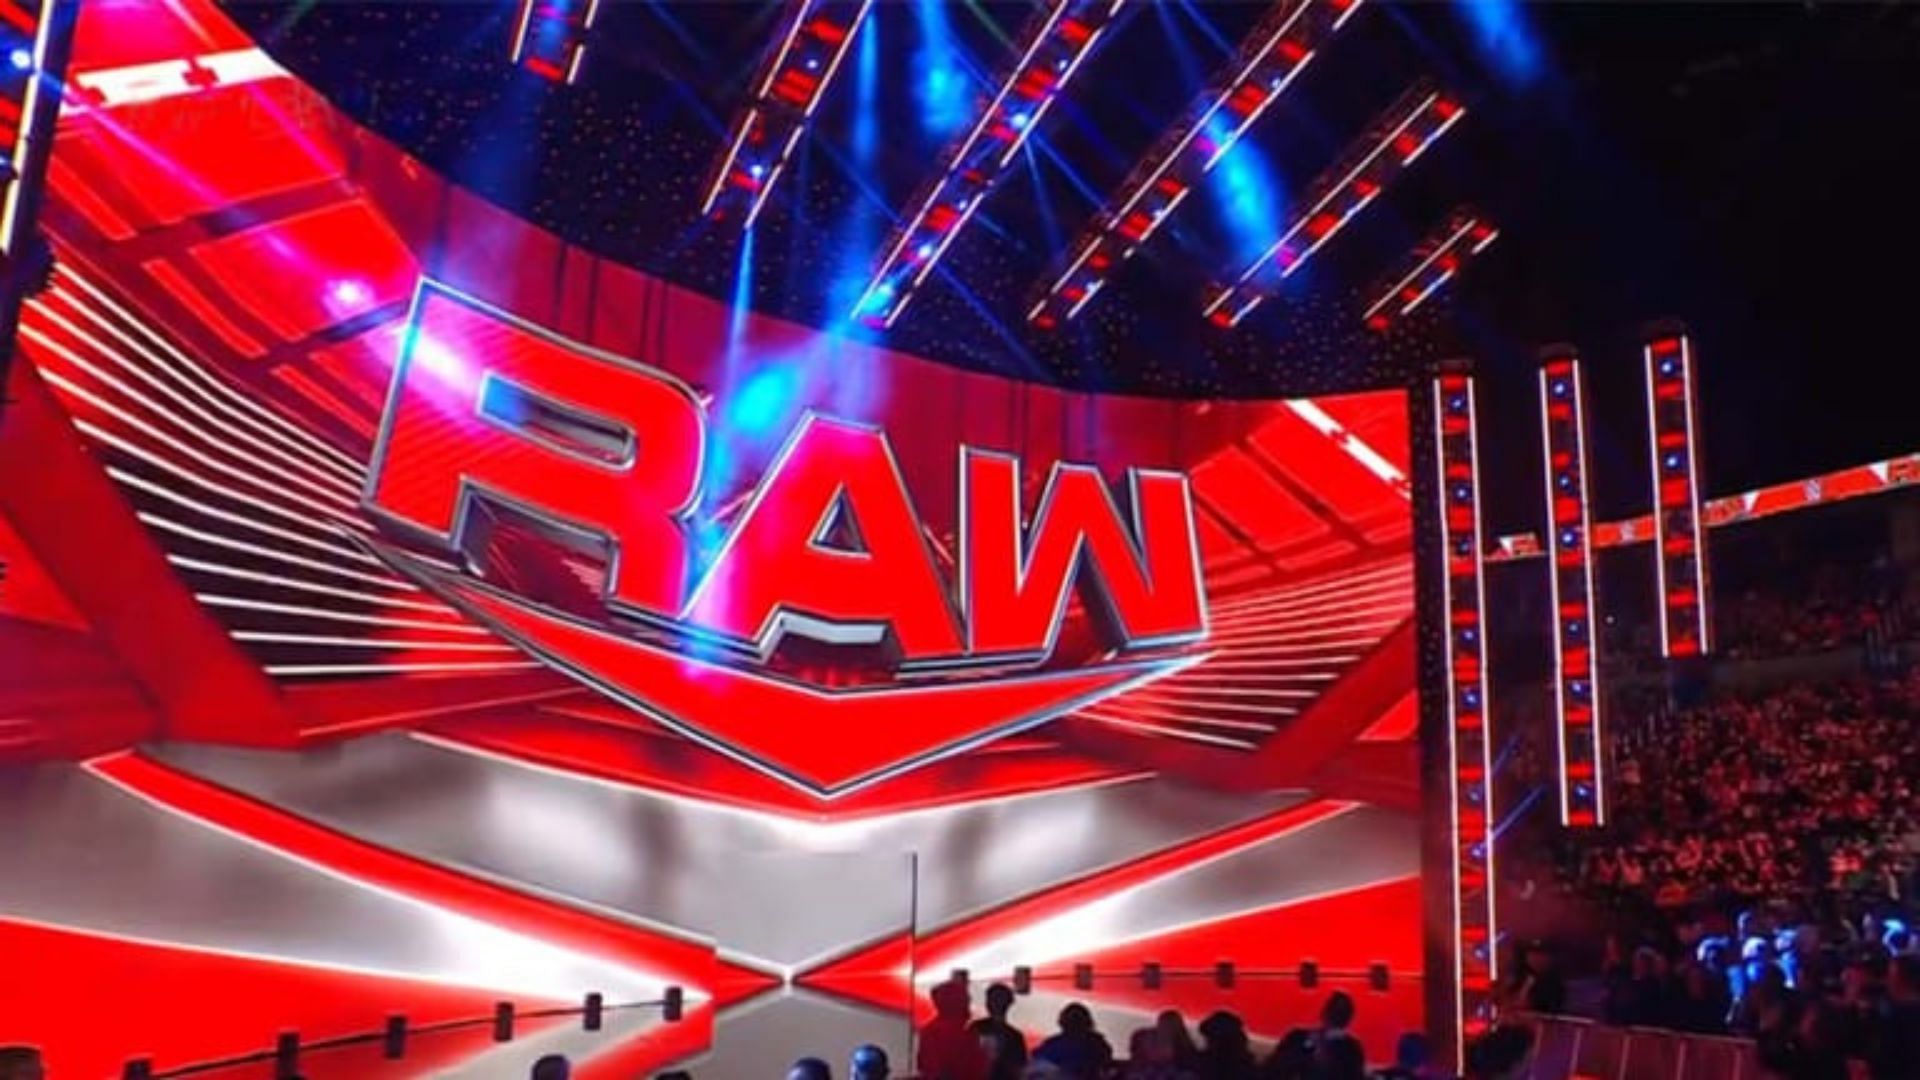 Monday Night Raw is the weekly Monday show of WWE